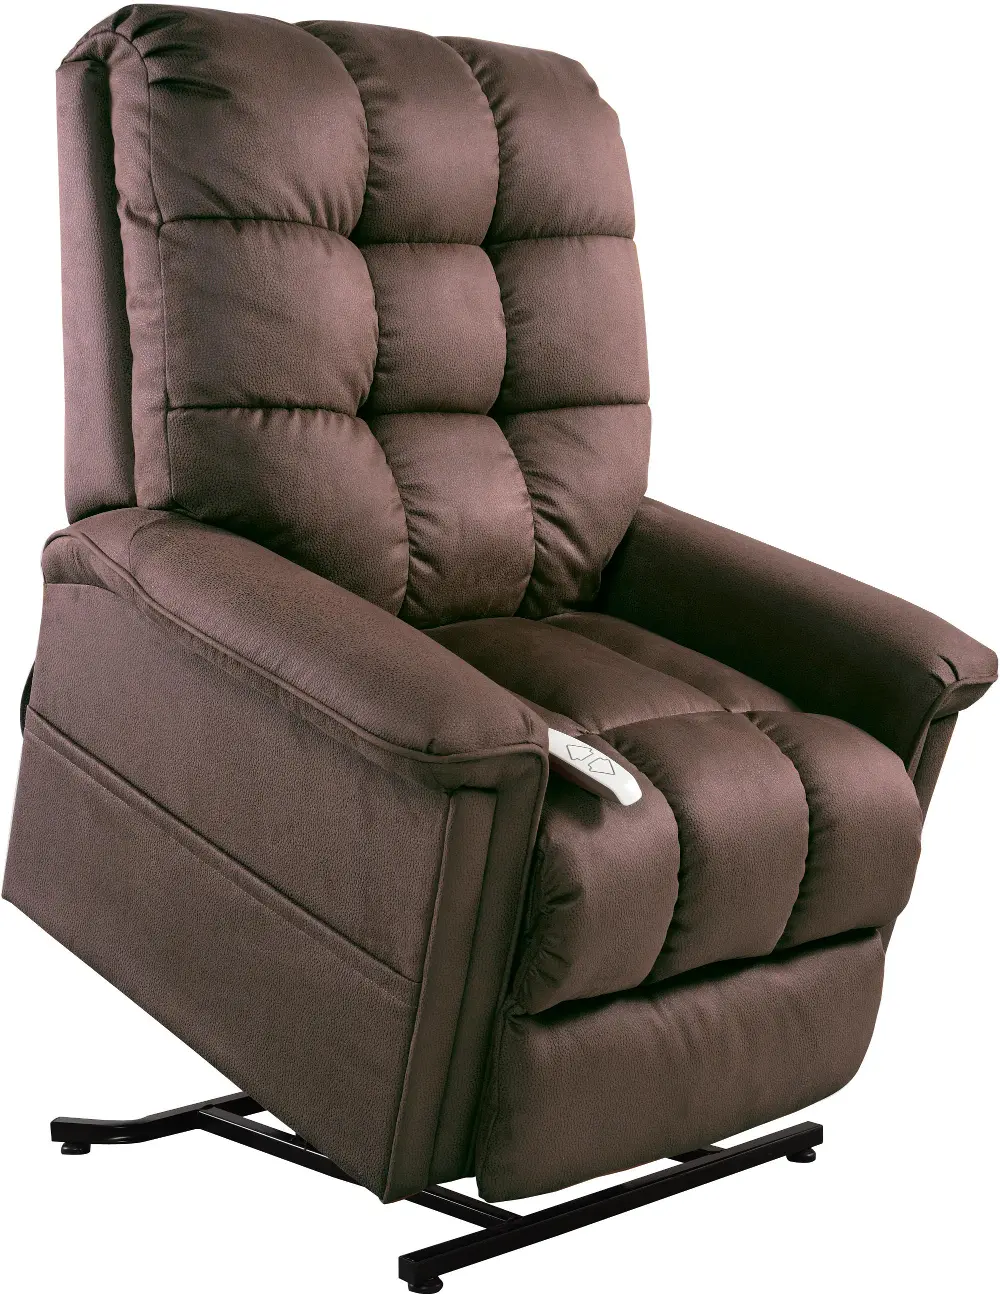 Mink Brown Power Recliner With Lift Option-1